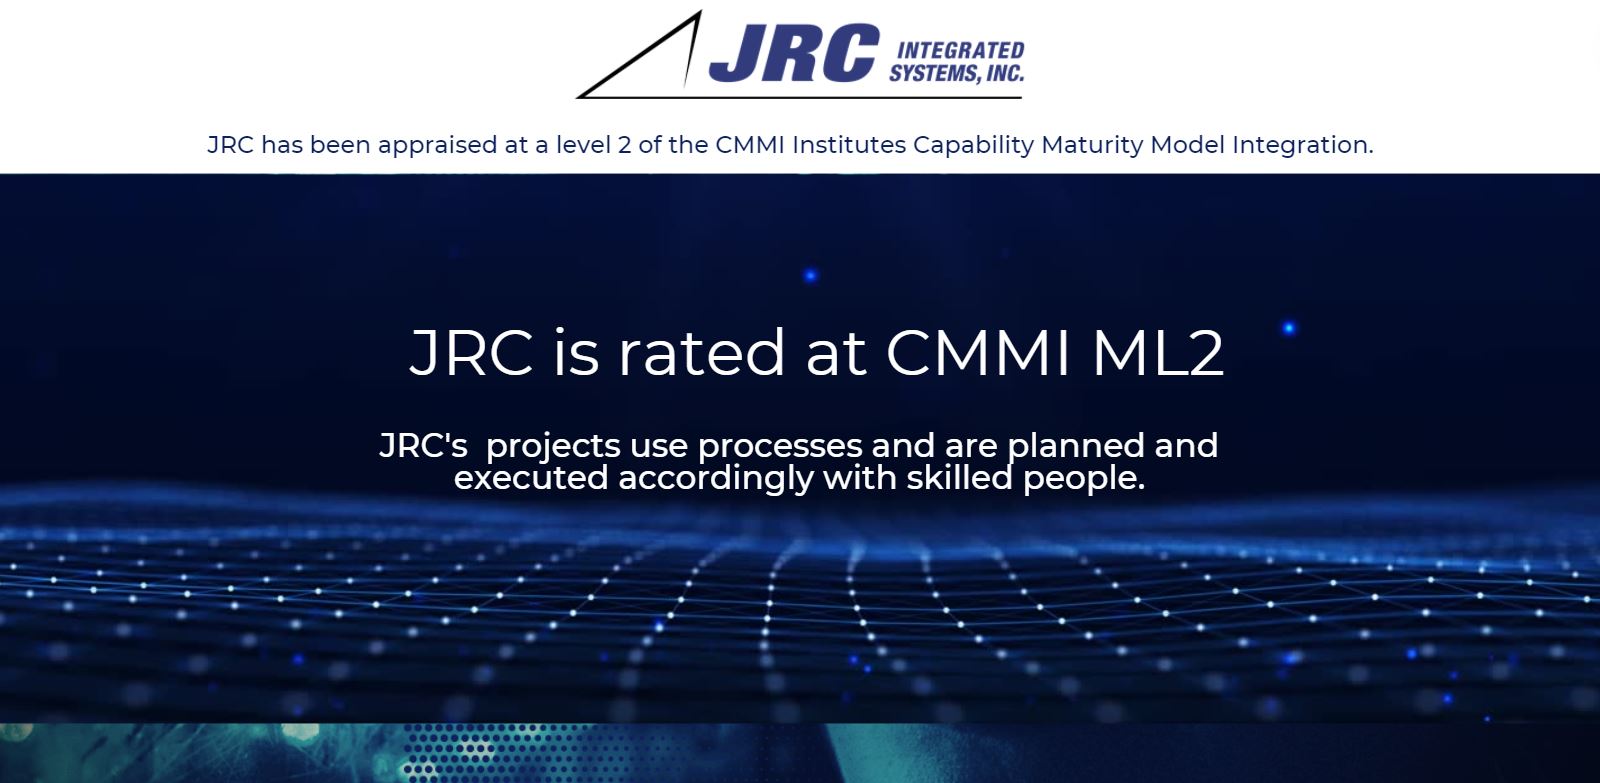 JRC IS APPRAISED AT A CMMI MATURITY LEVEL 2